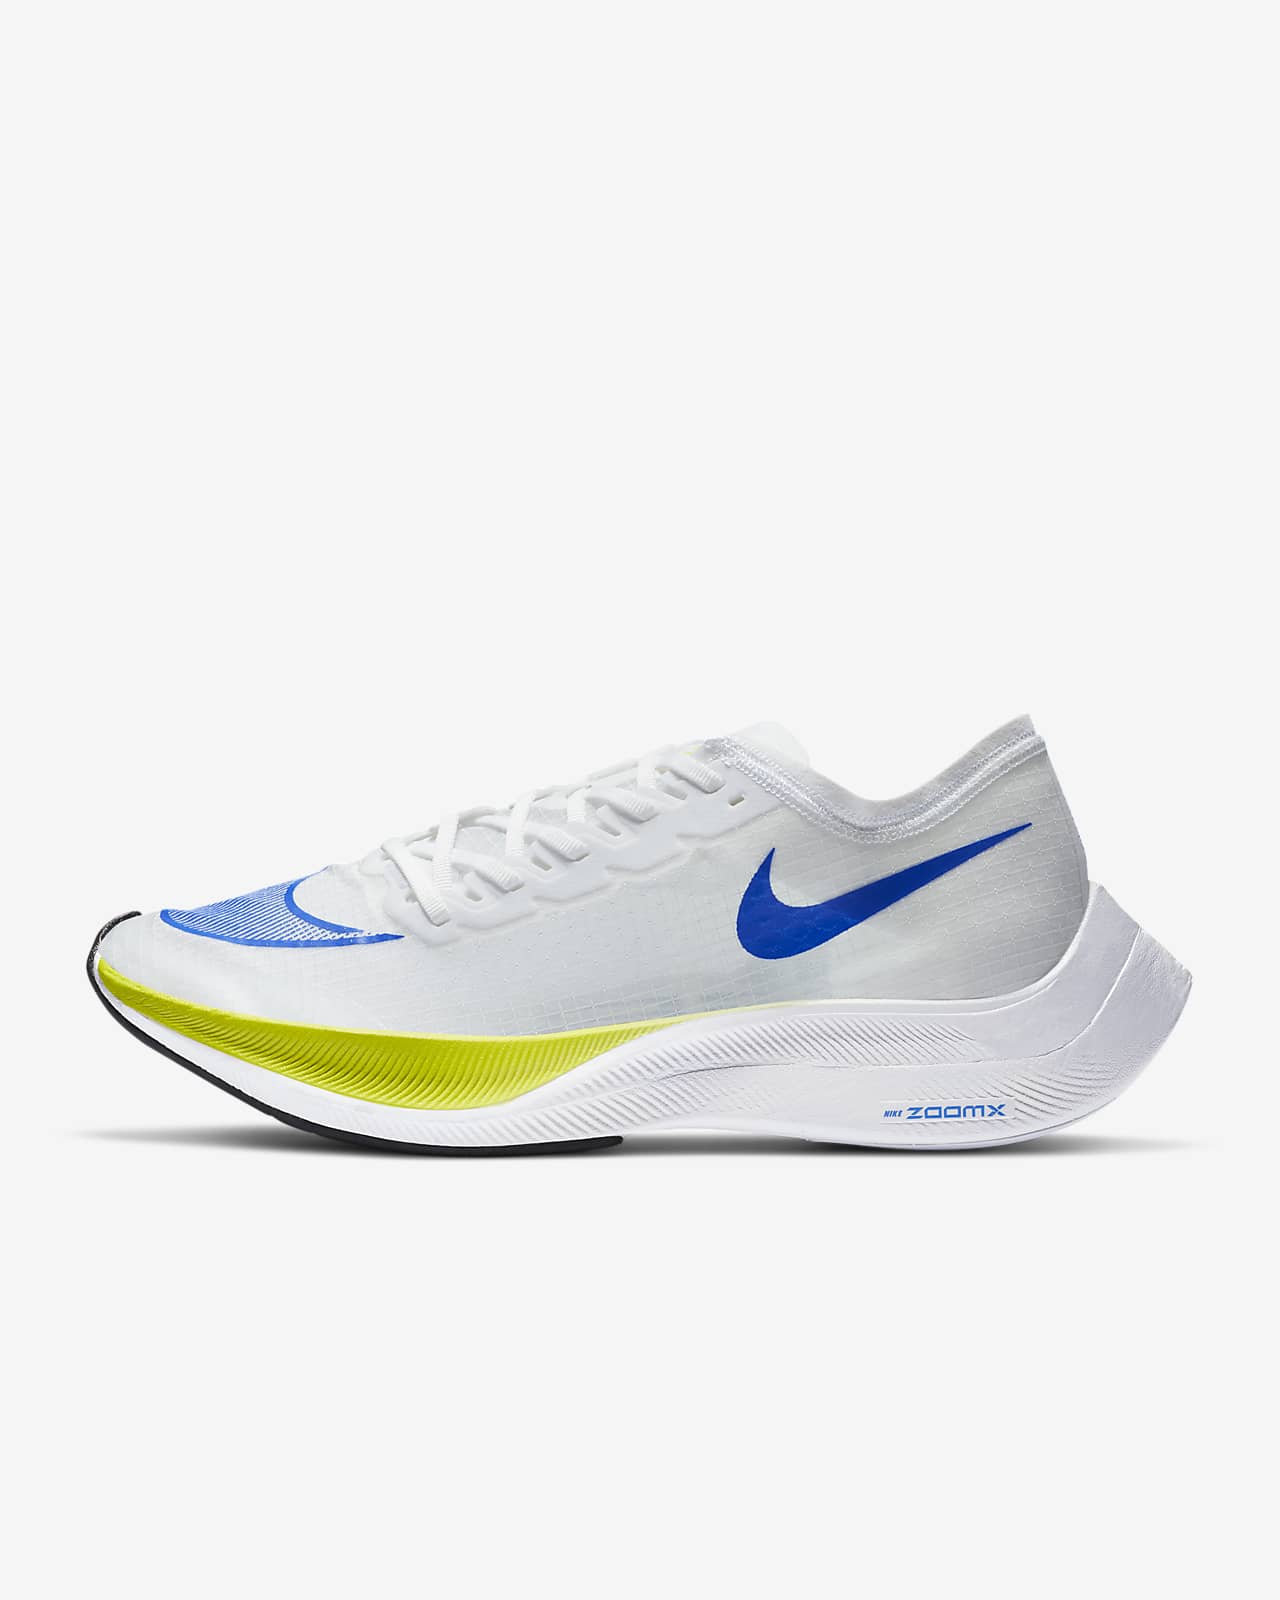 zoomx nike shoes price